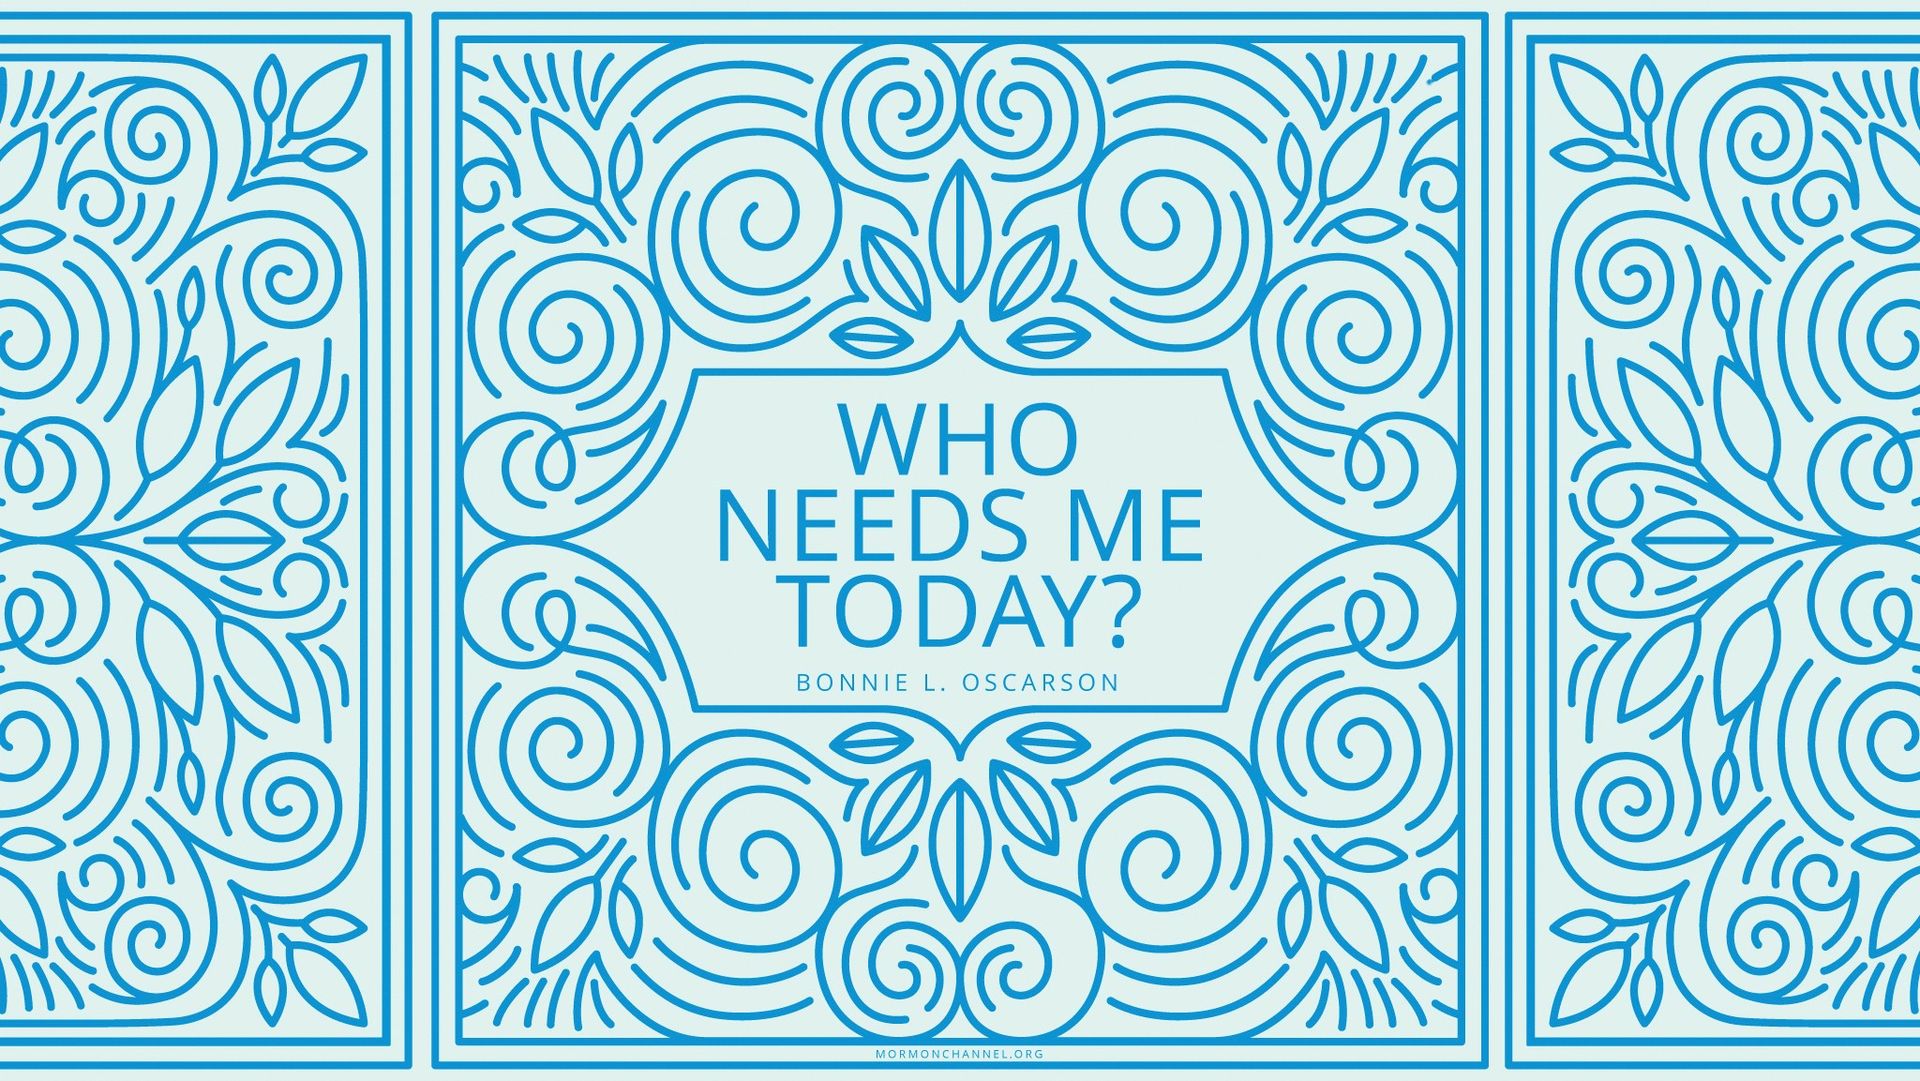 “Who needs me today?”—Sister Bonnie L. Oscarson, “The Needs before Us” © undefined ipCode 1.